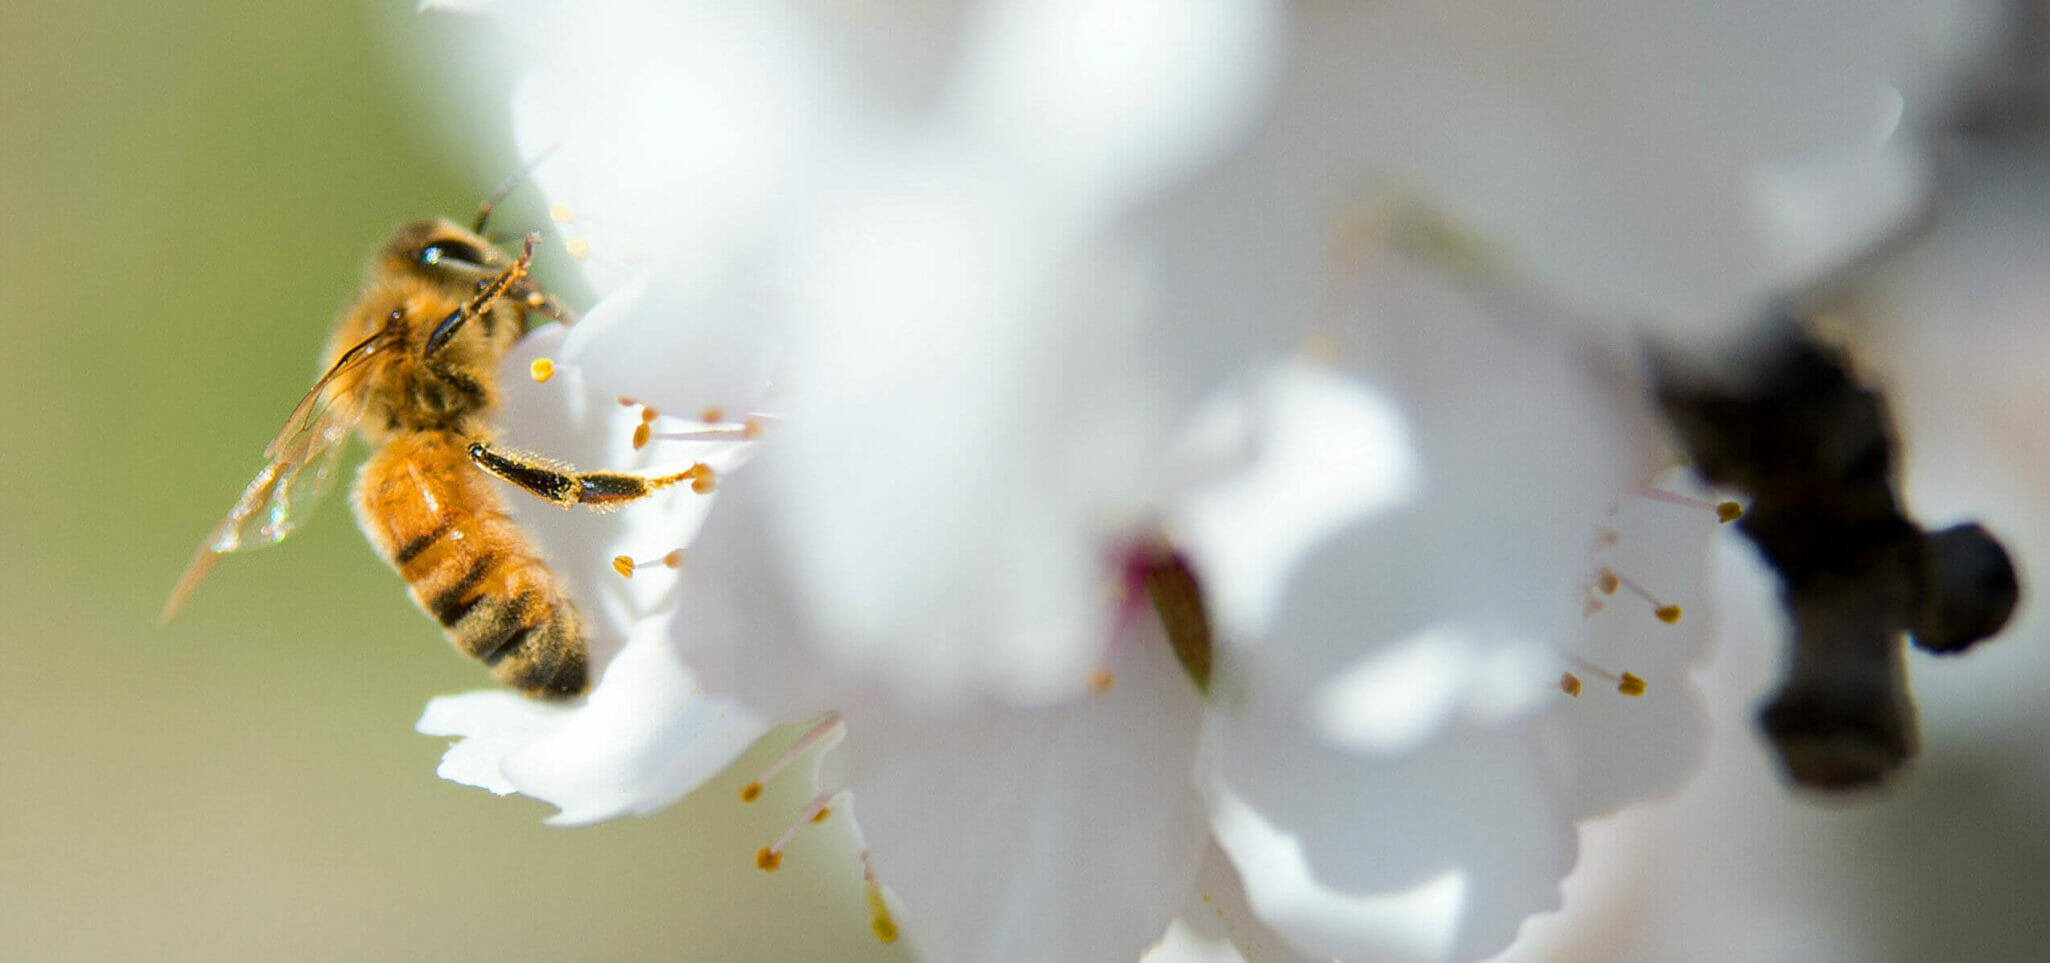 An unhealthy alliance between almonds and honeybees | Food and Environment Reporting Network